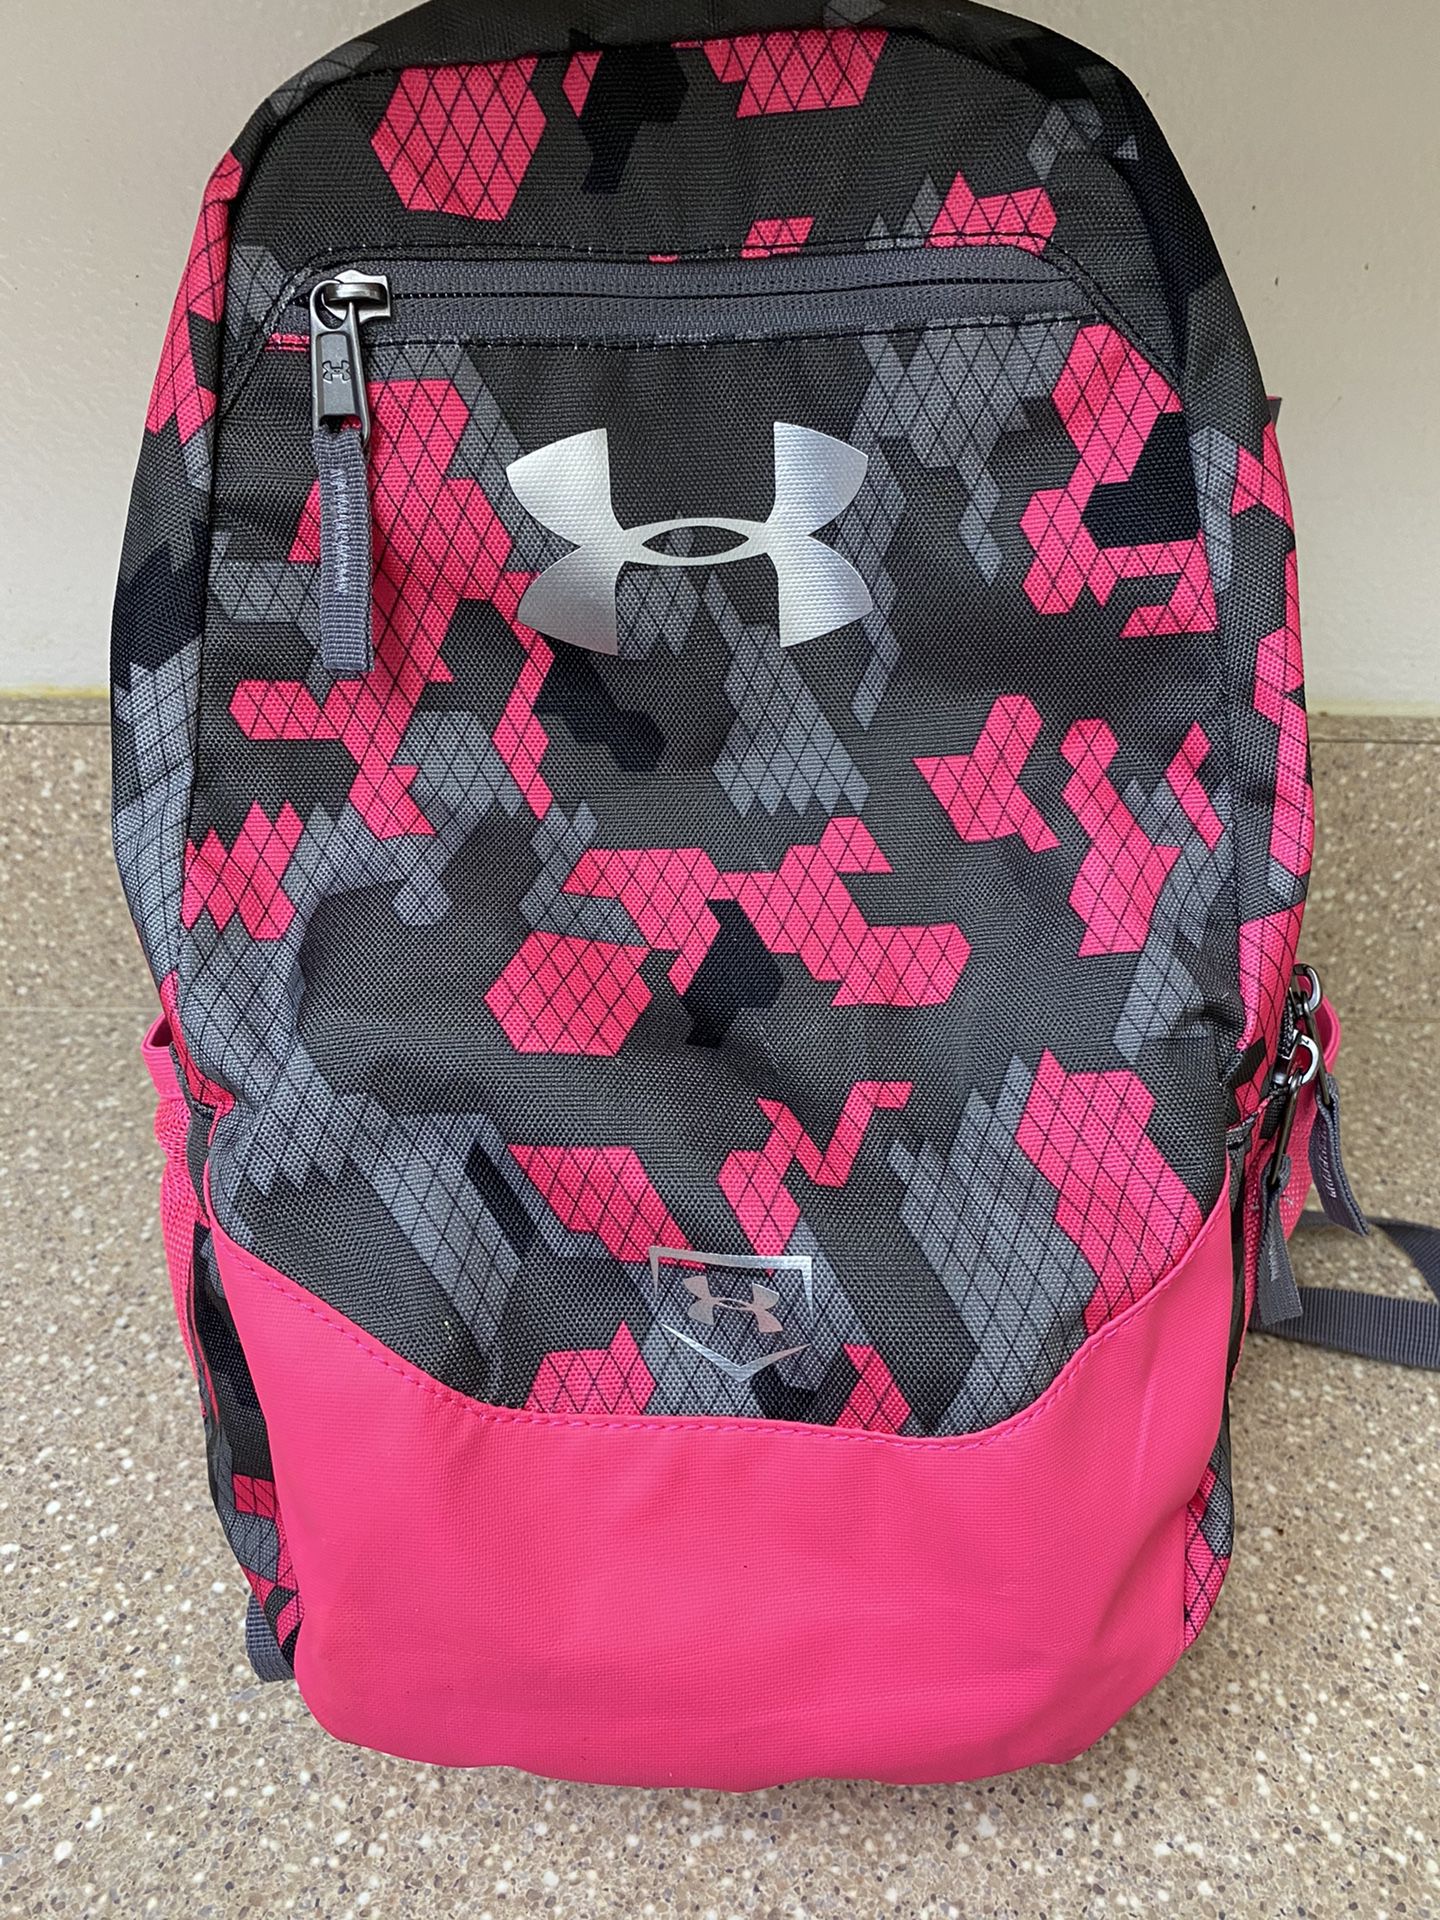 T-Ball Backpack-Under Armour JR.